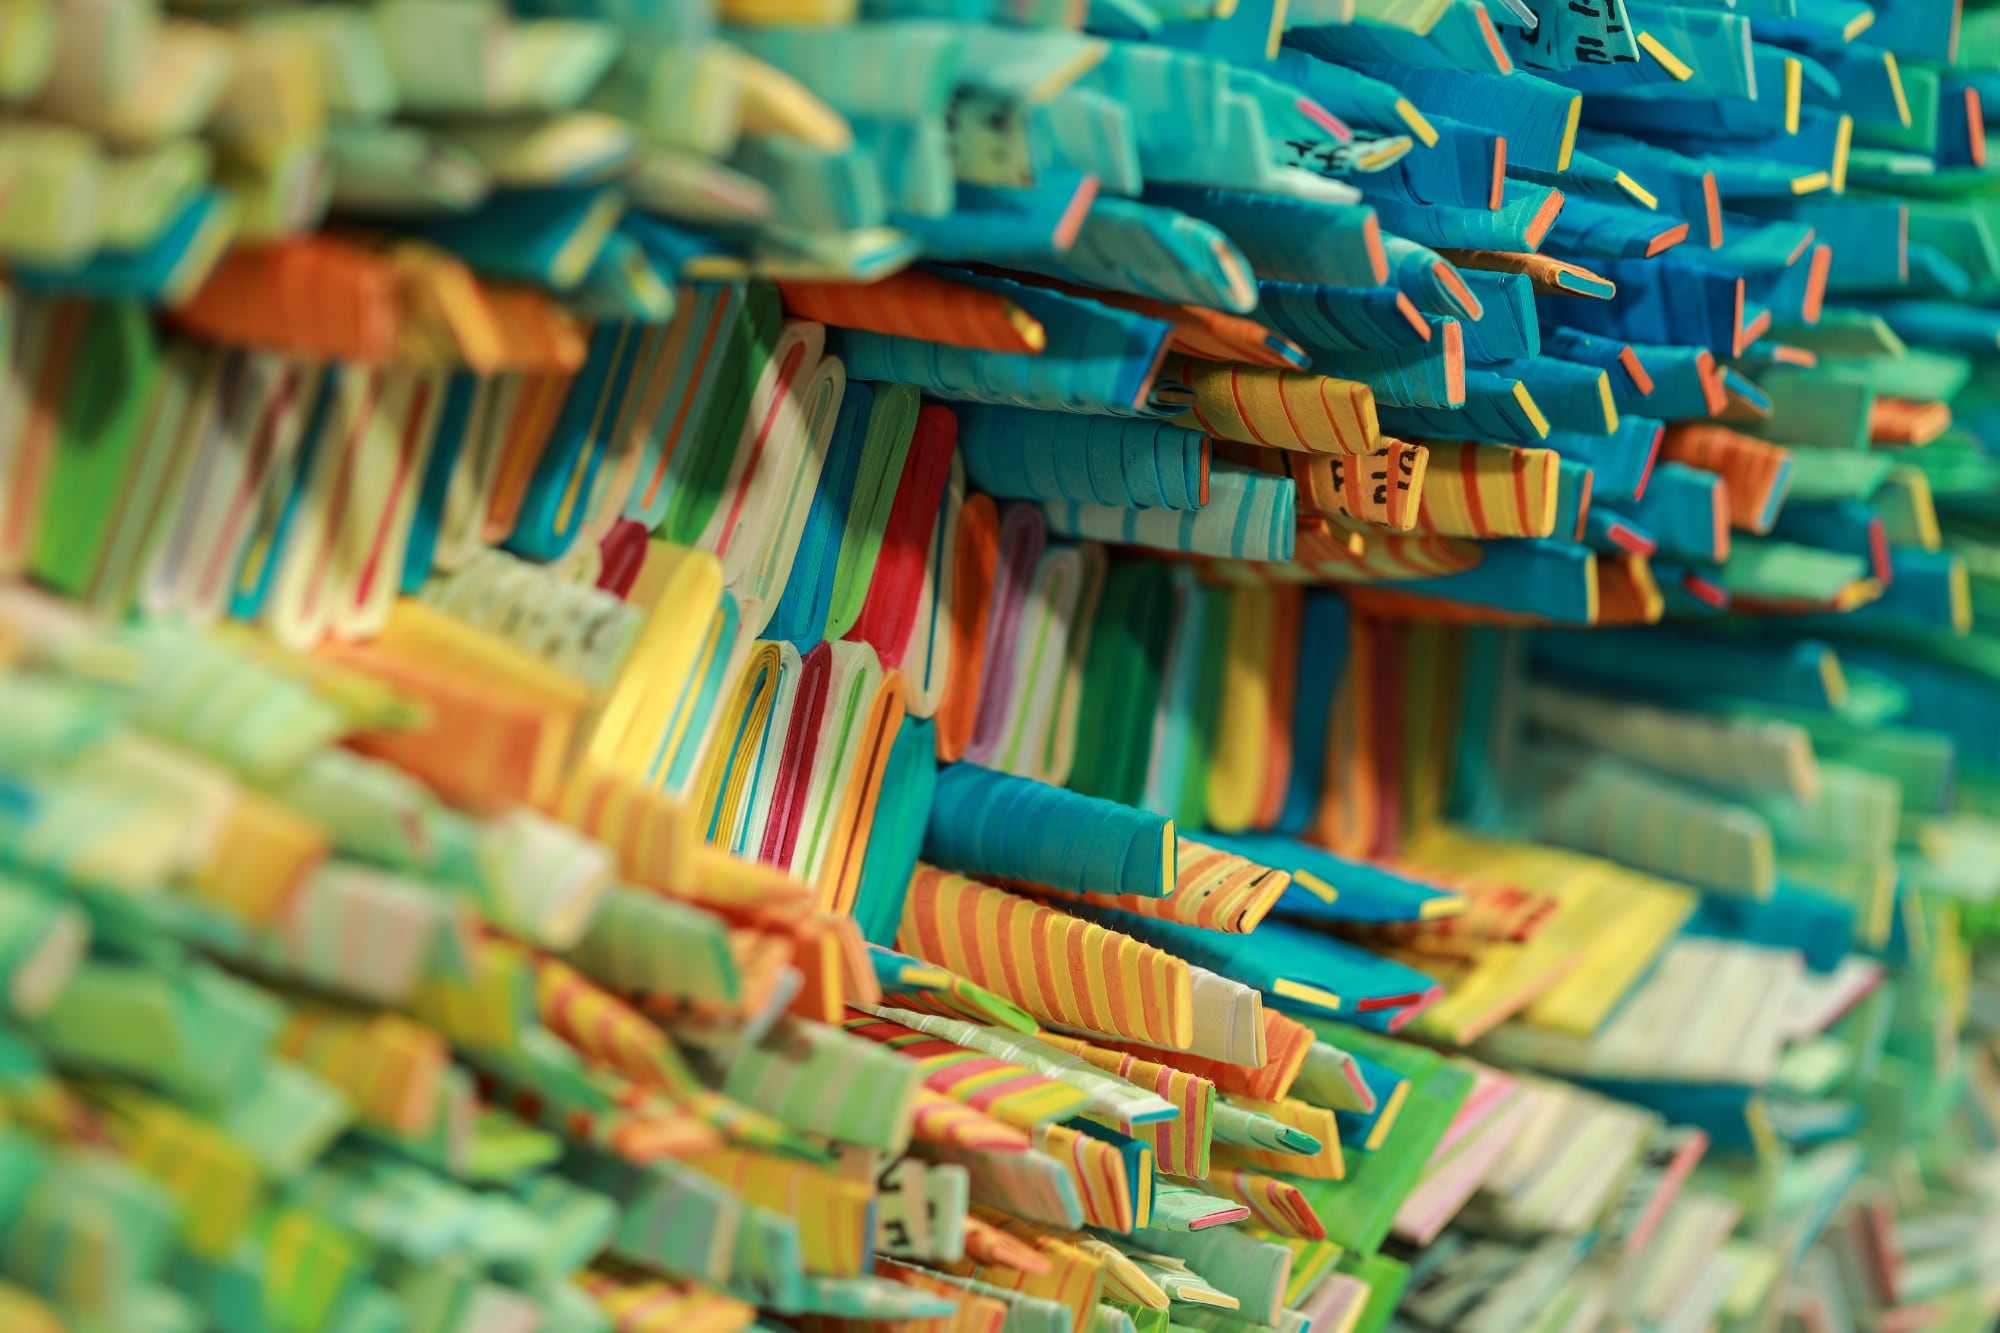 a close up image of colorful rolled paper tightly packed together